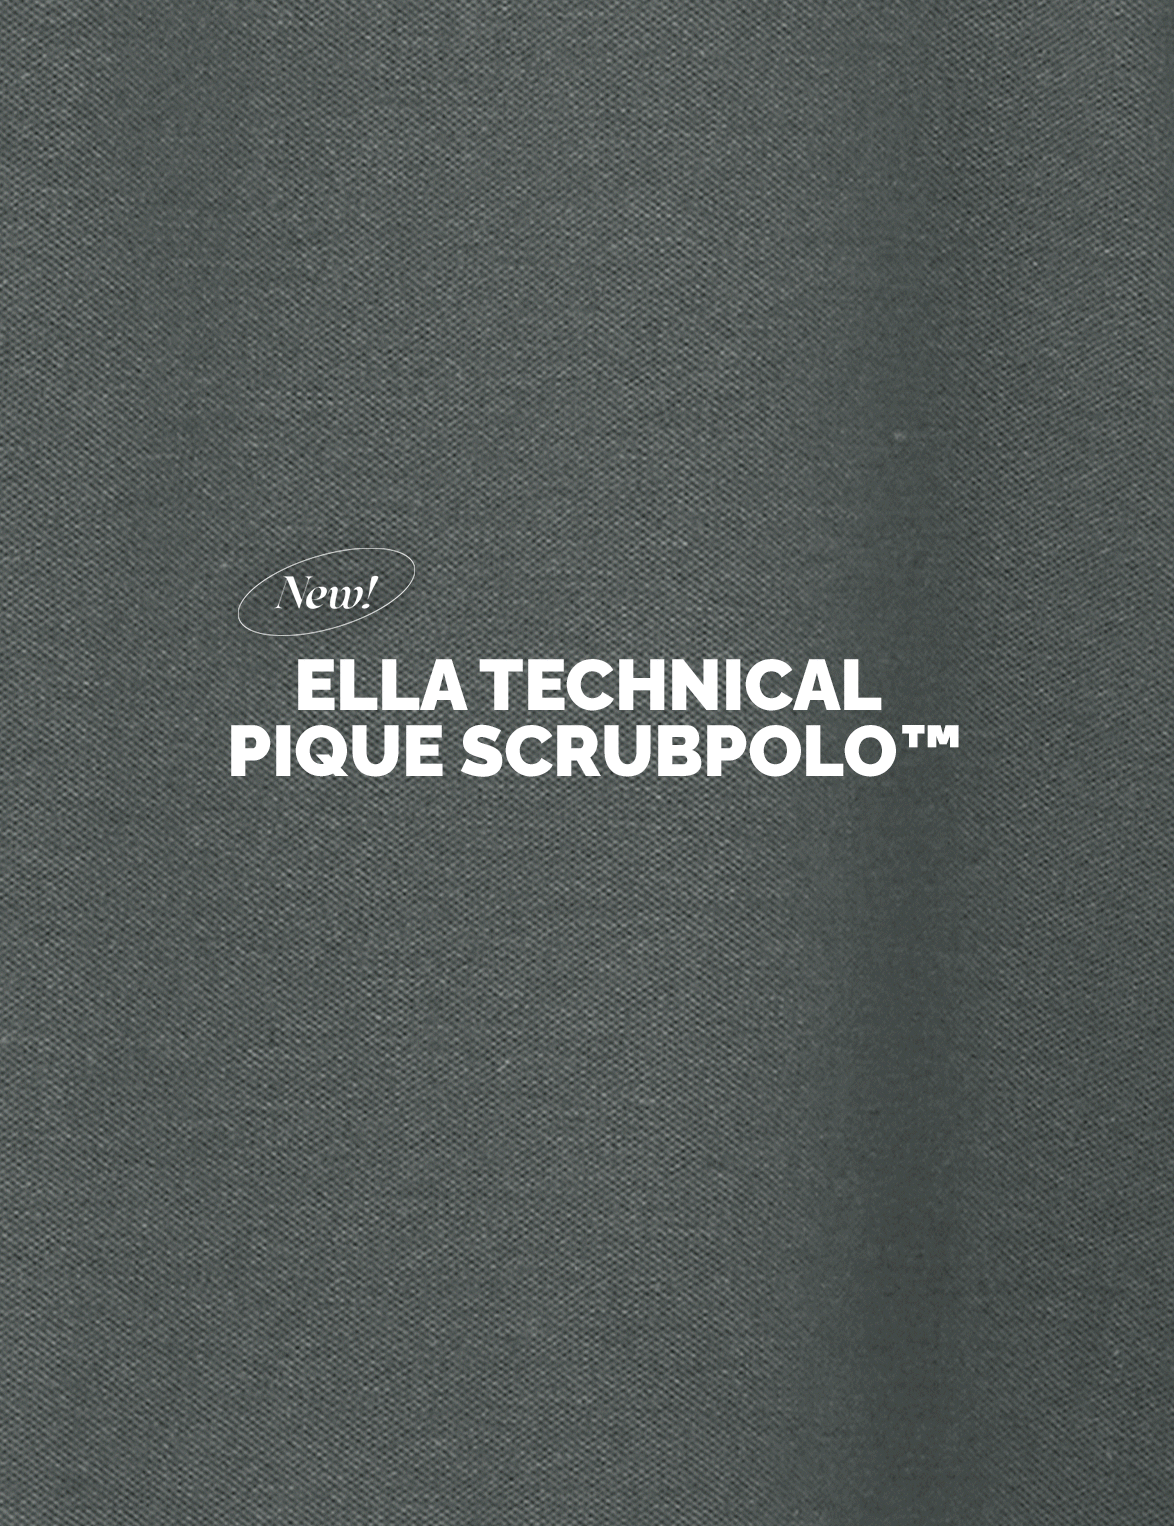 SUPER SOFT AND BREATHABLE. The Ella Technical Pique ScrubPolo™ is made with 100% Pima Cotton to stay comfy during telemedicine appointments.